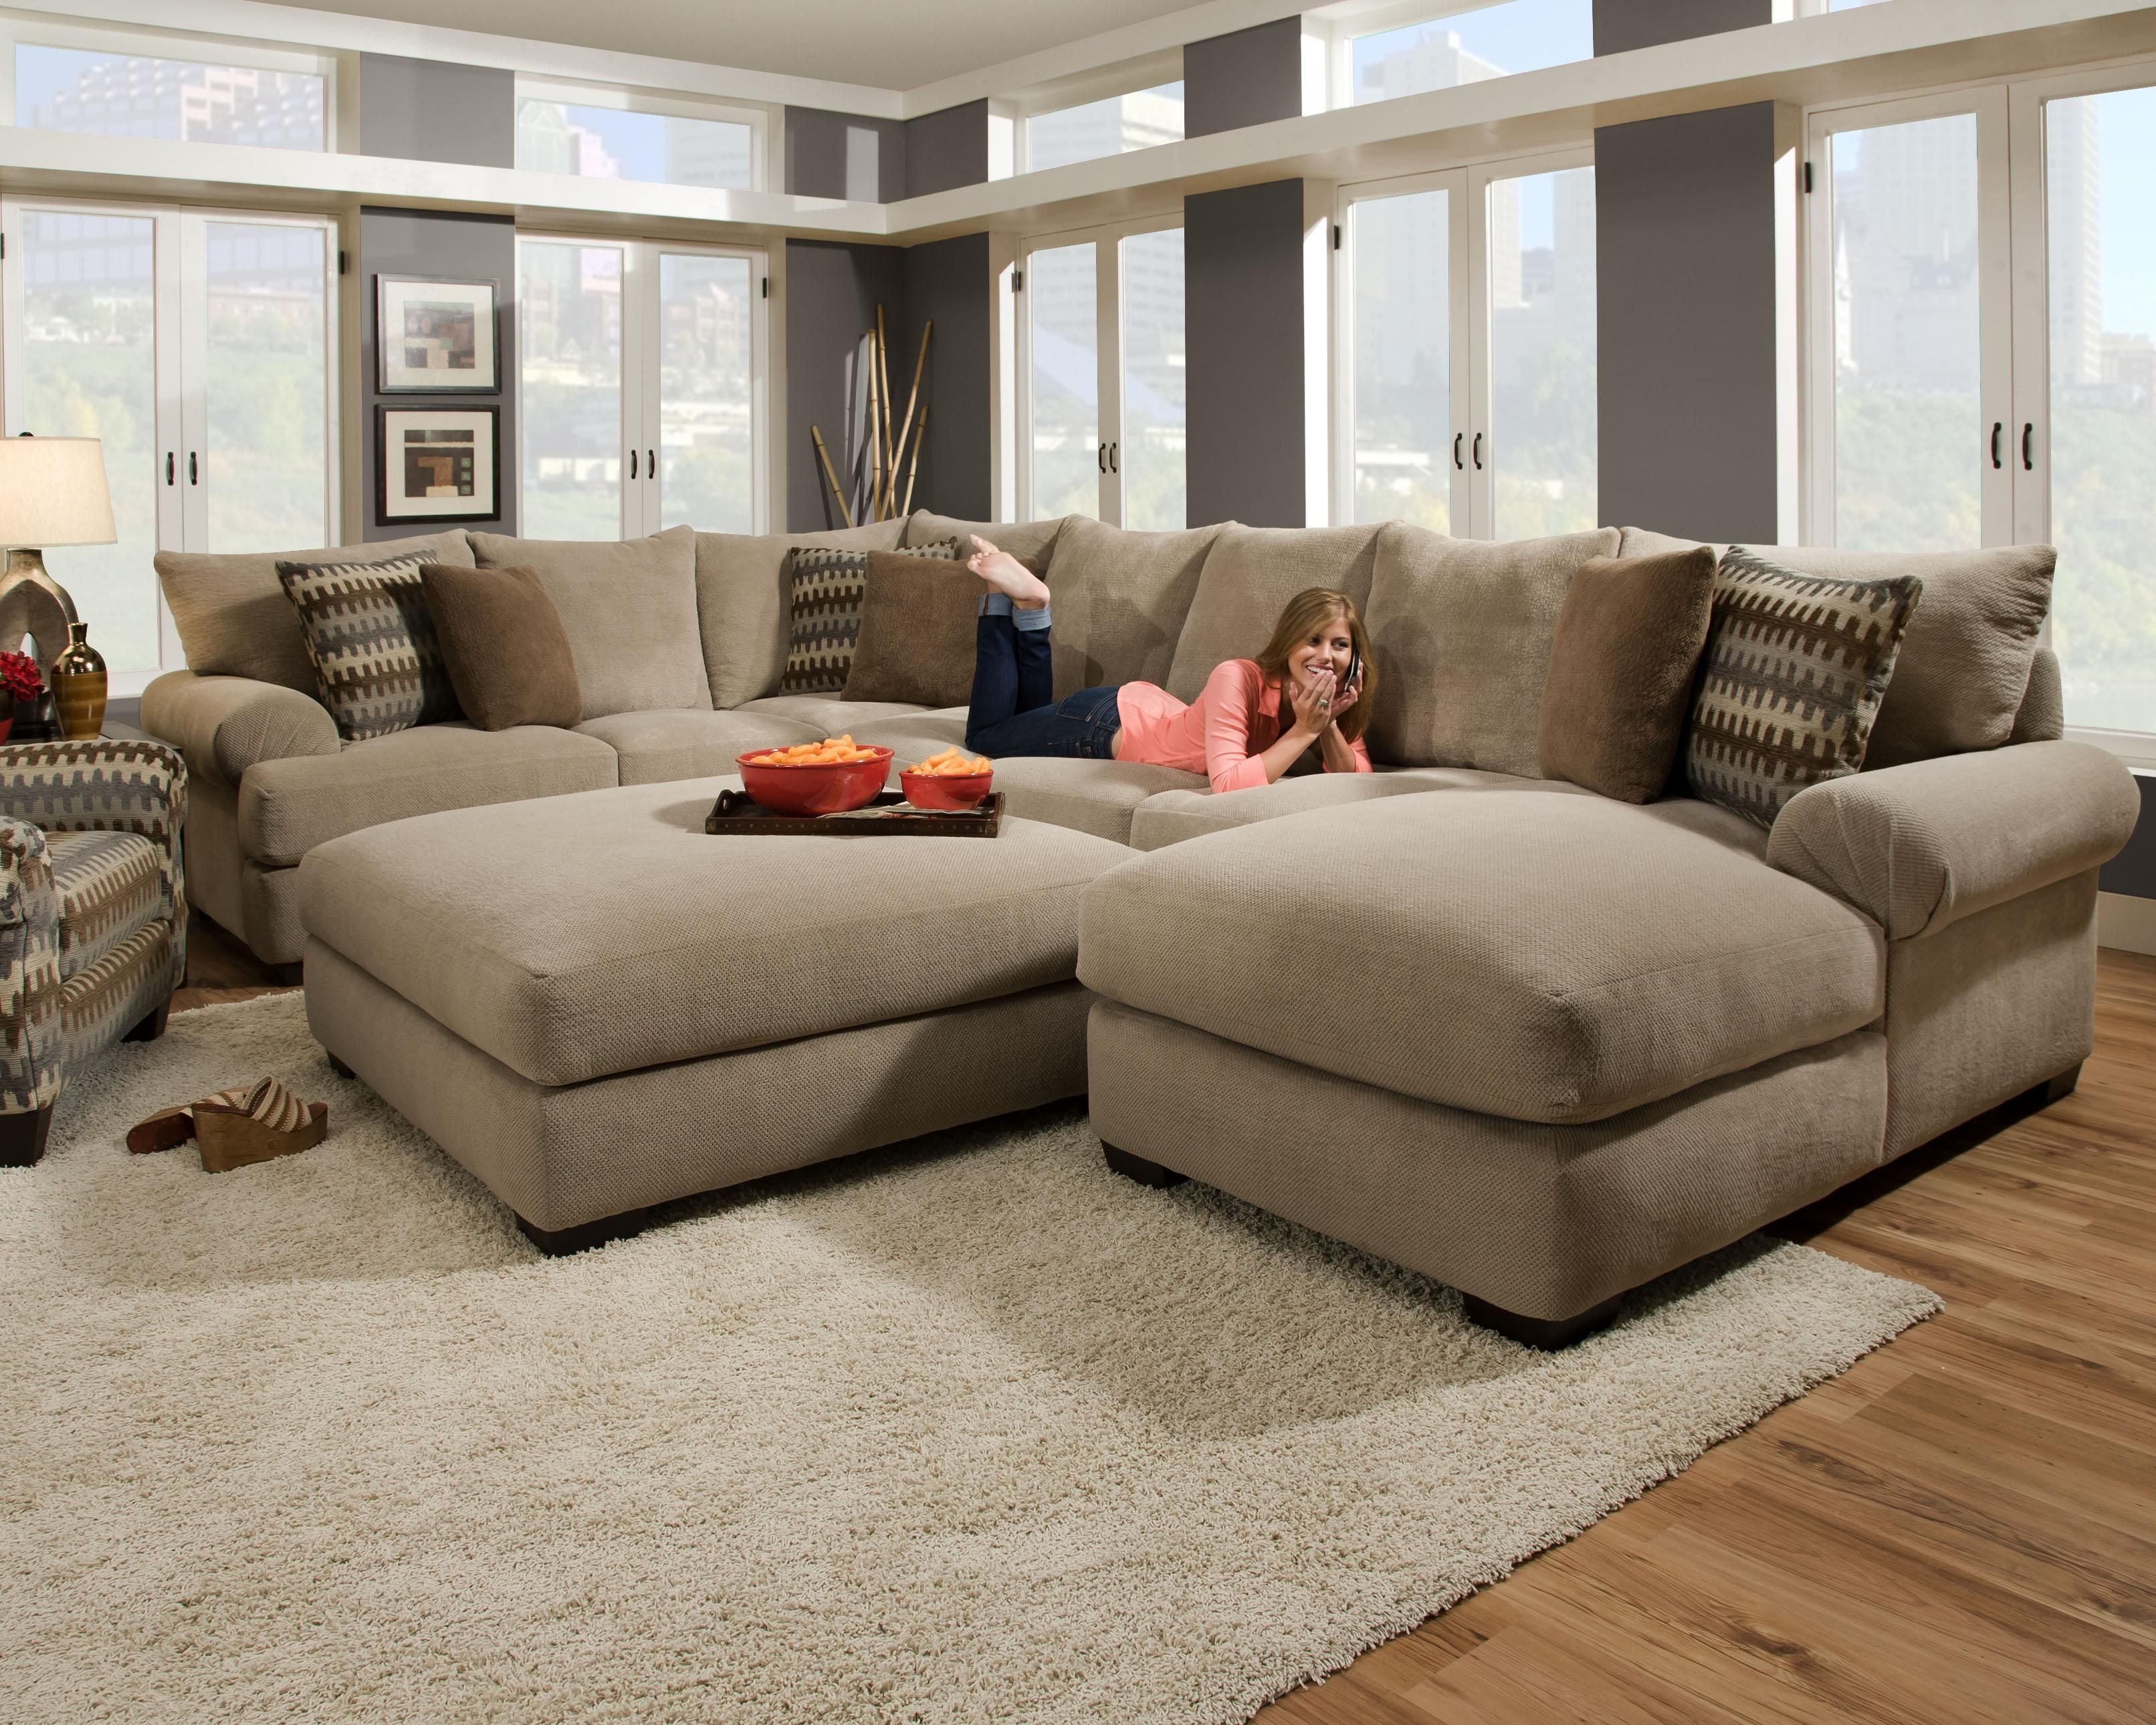 Furniture Design Idea For Living Room And Oversized U Shaped Pertaining To Comfy Sectional Sofa (View 12 of 12)